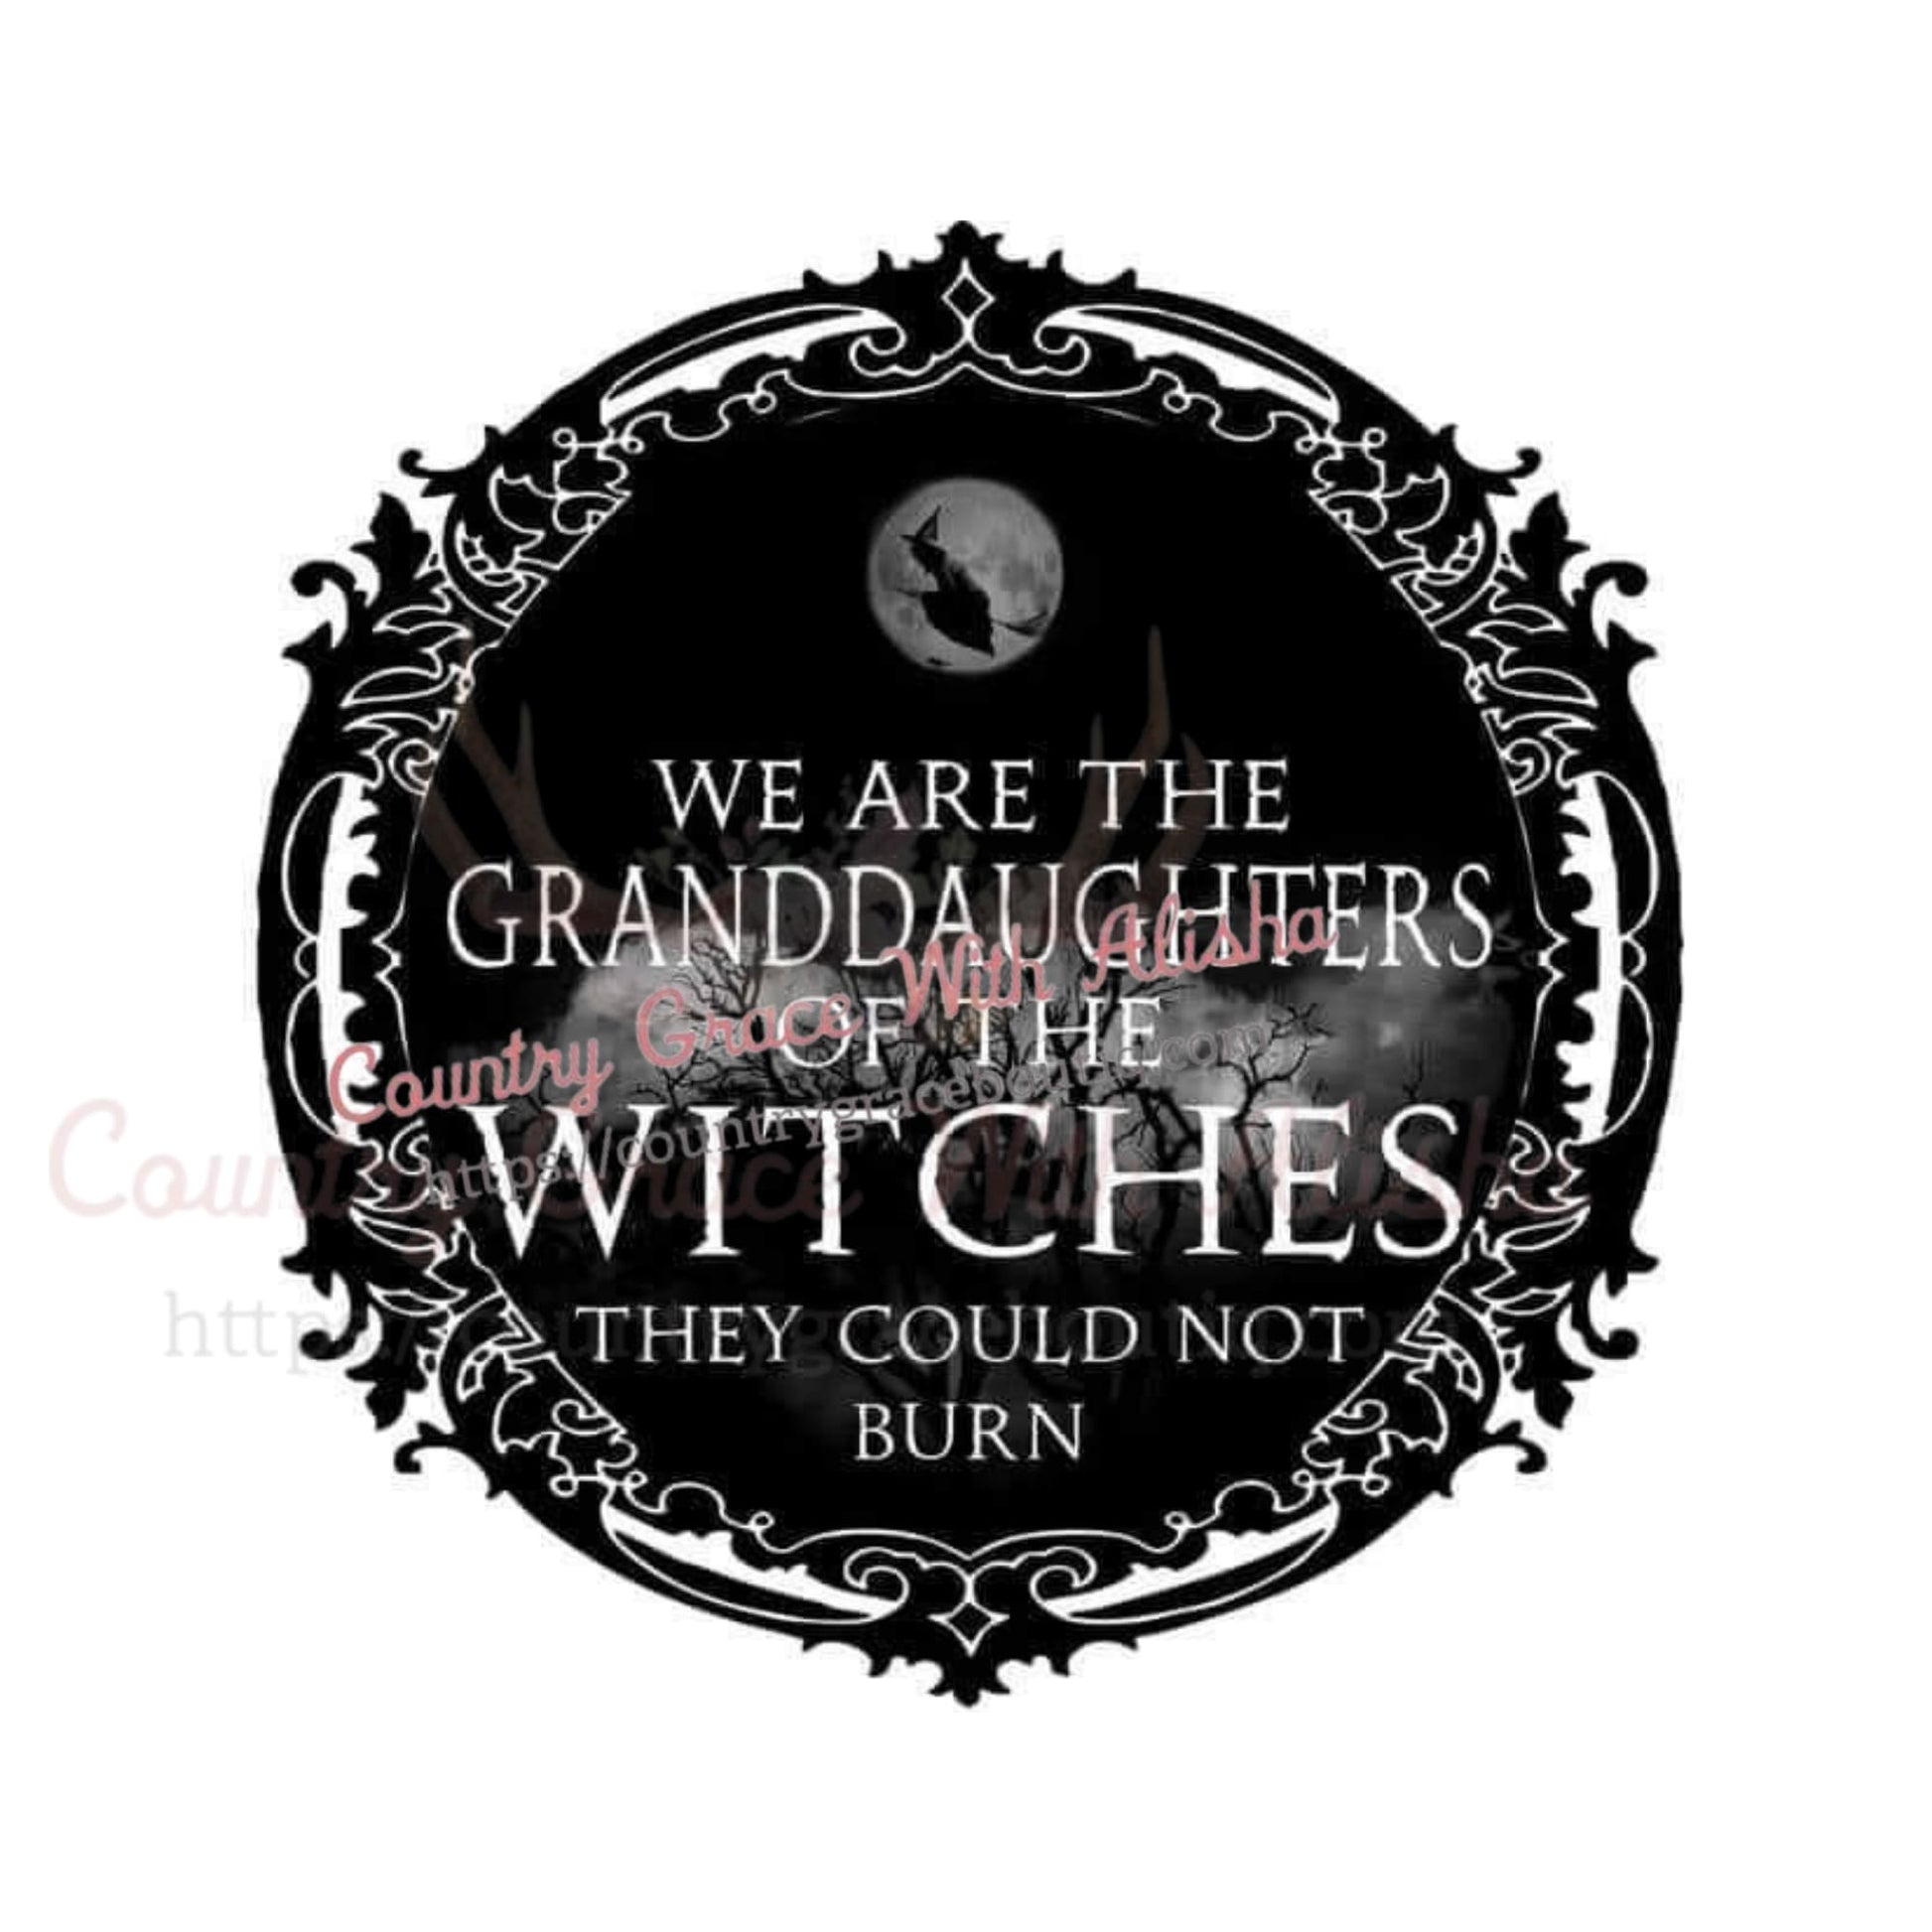 We Are The Granddaughters Sublimation Transfer - Sub $1.50 